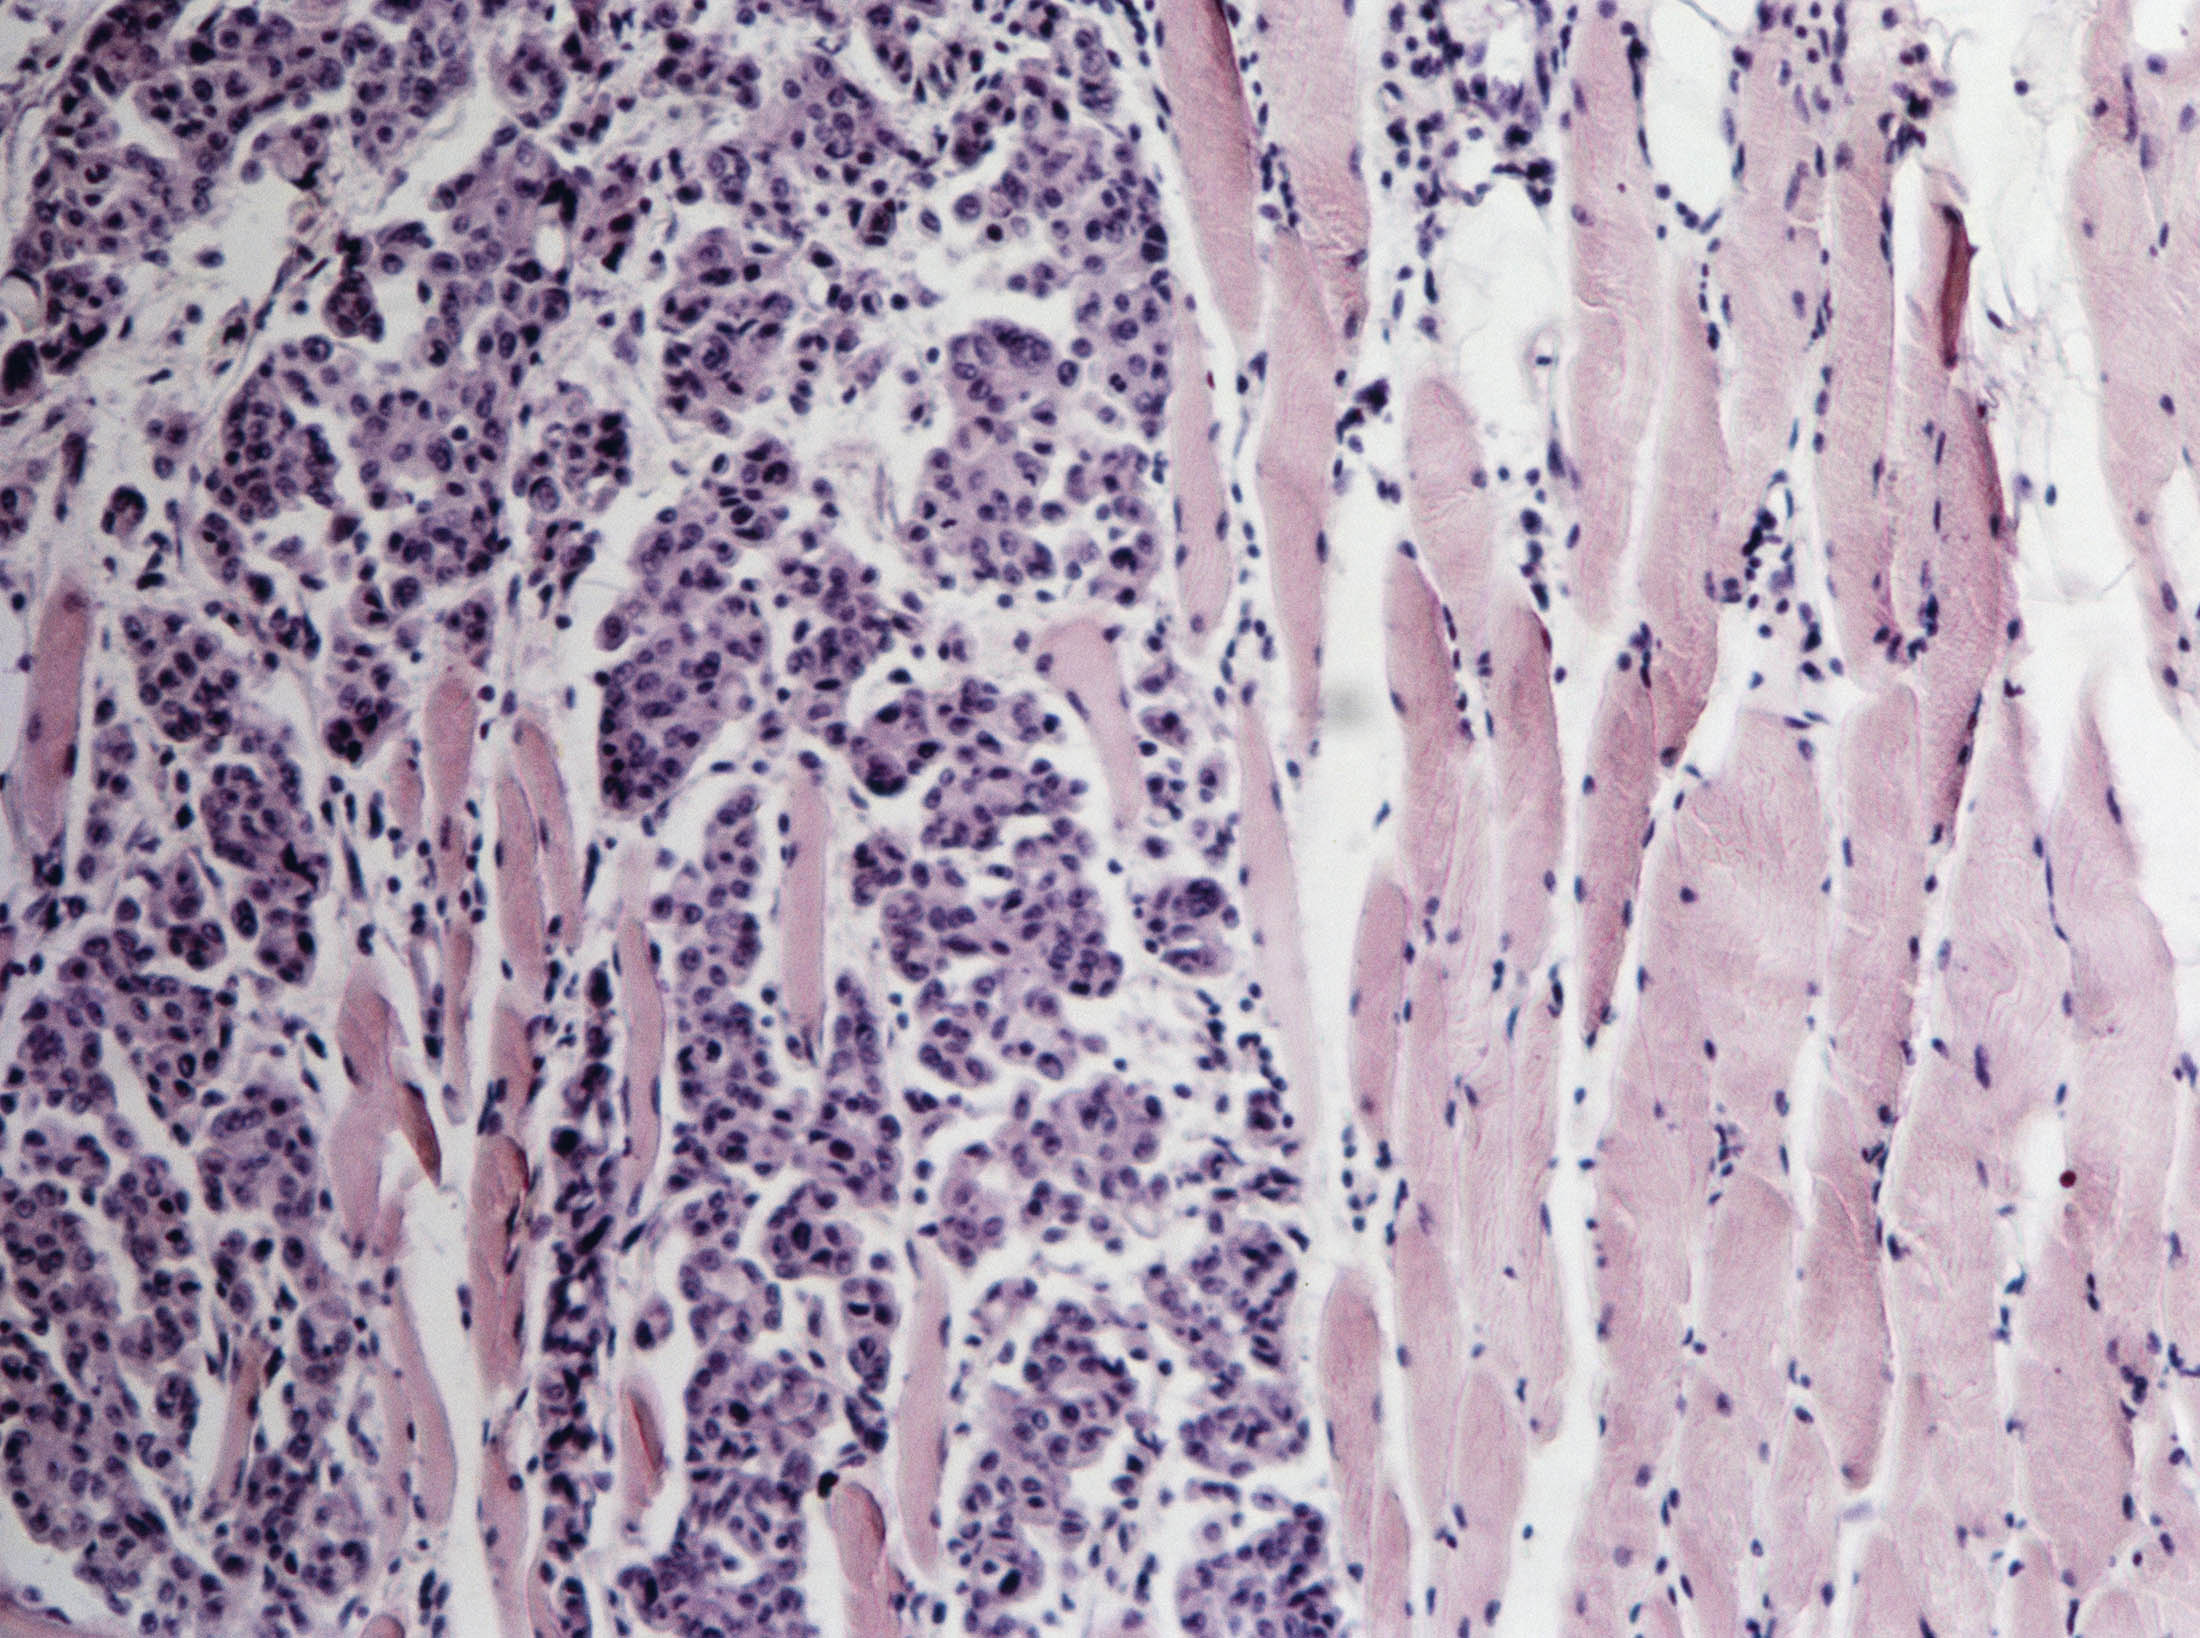 Carcinoma invading a human striated muscle.